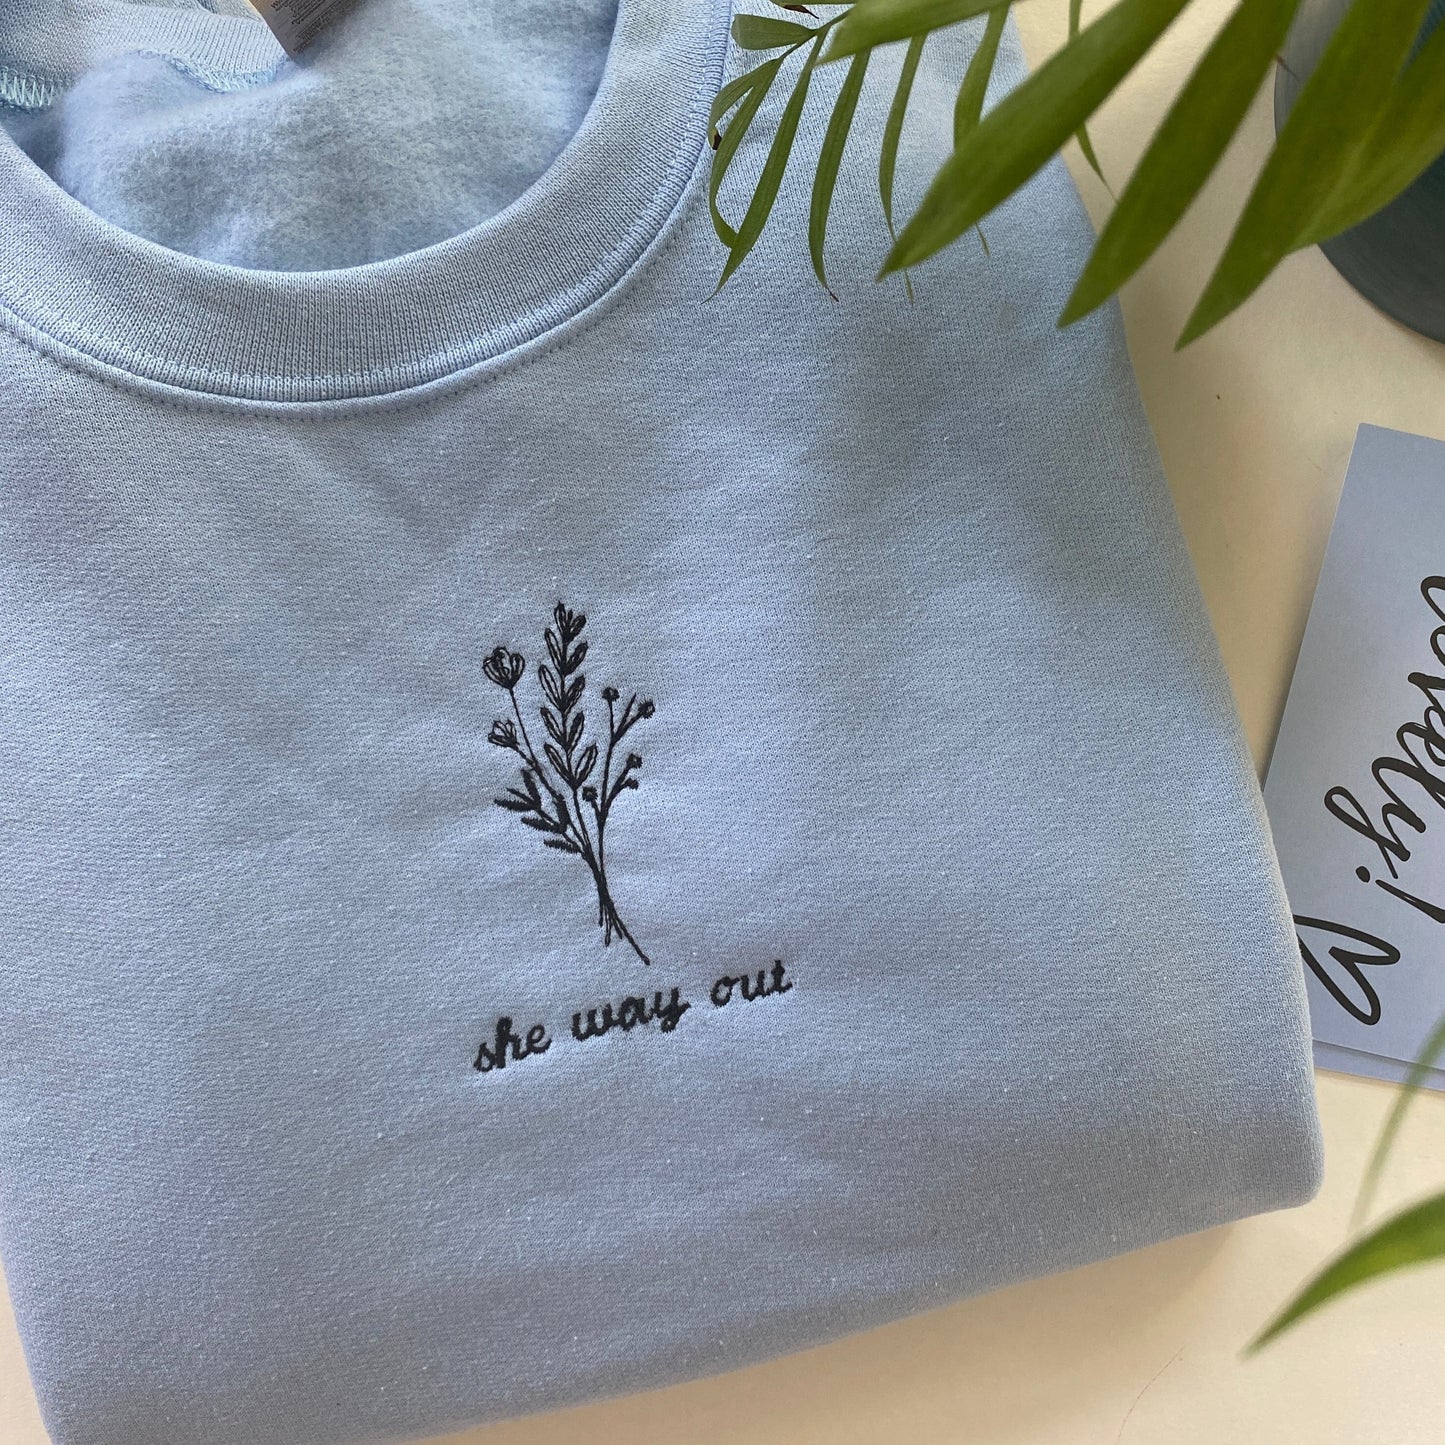 'She way out' Embroidered Sweatshirt